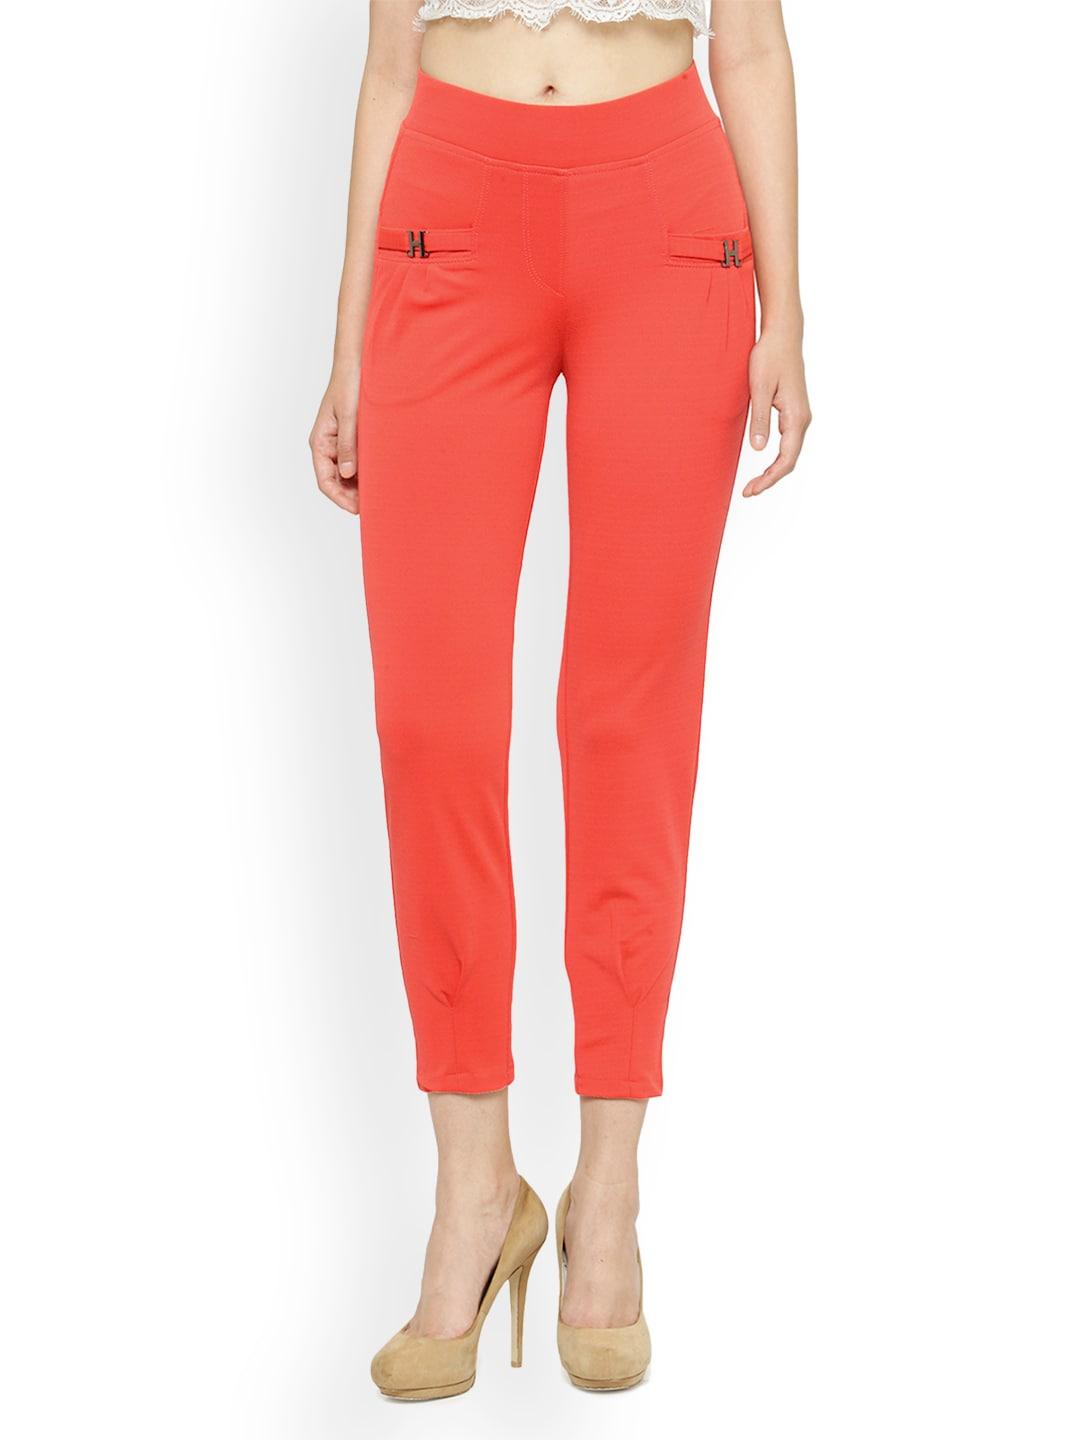 westwood-coral-red-jeggings